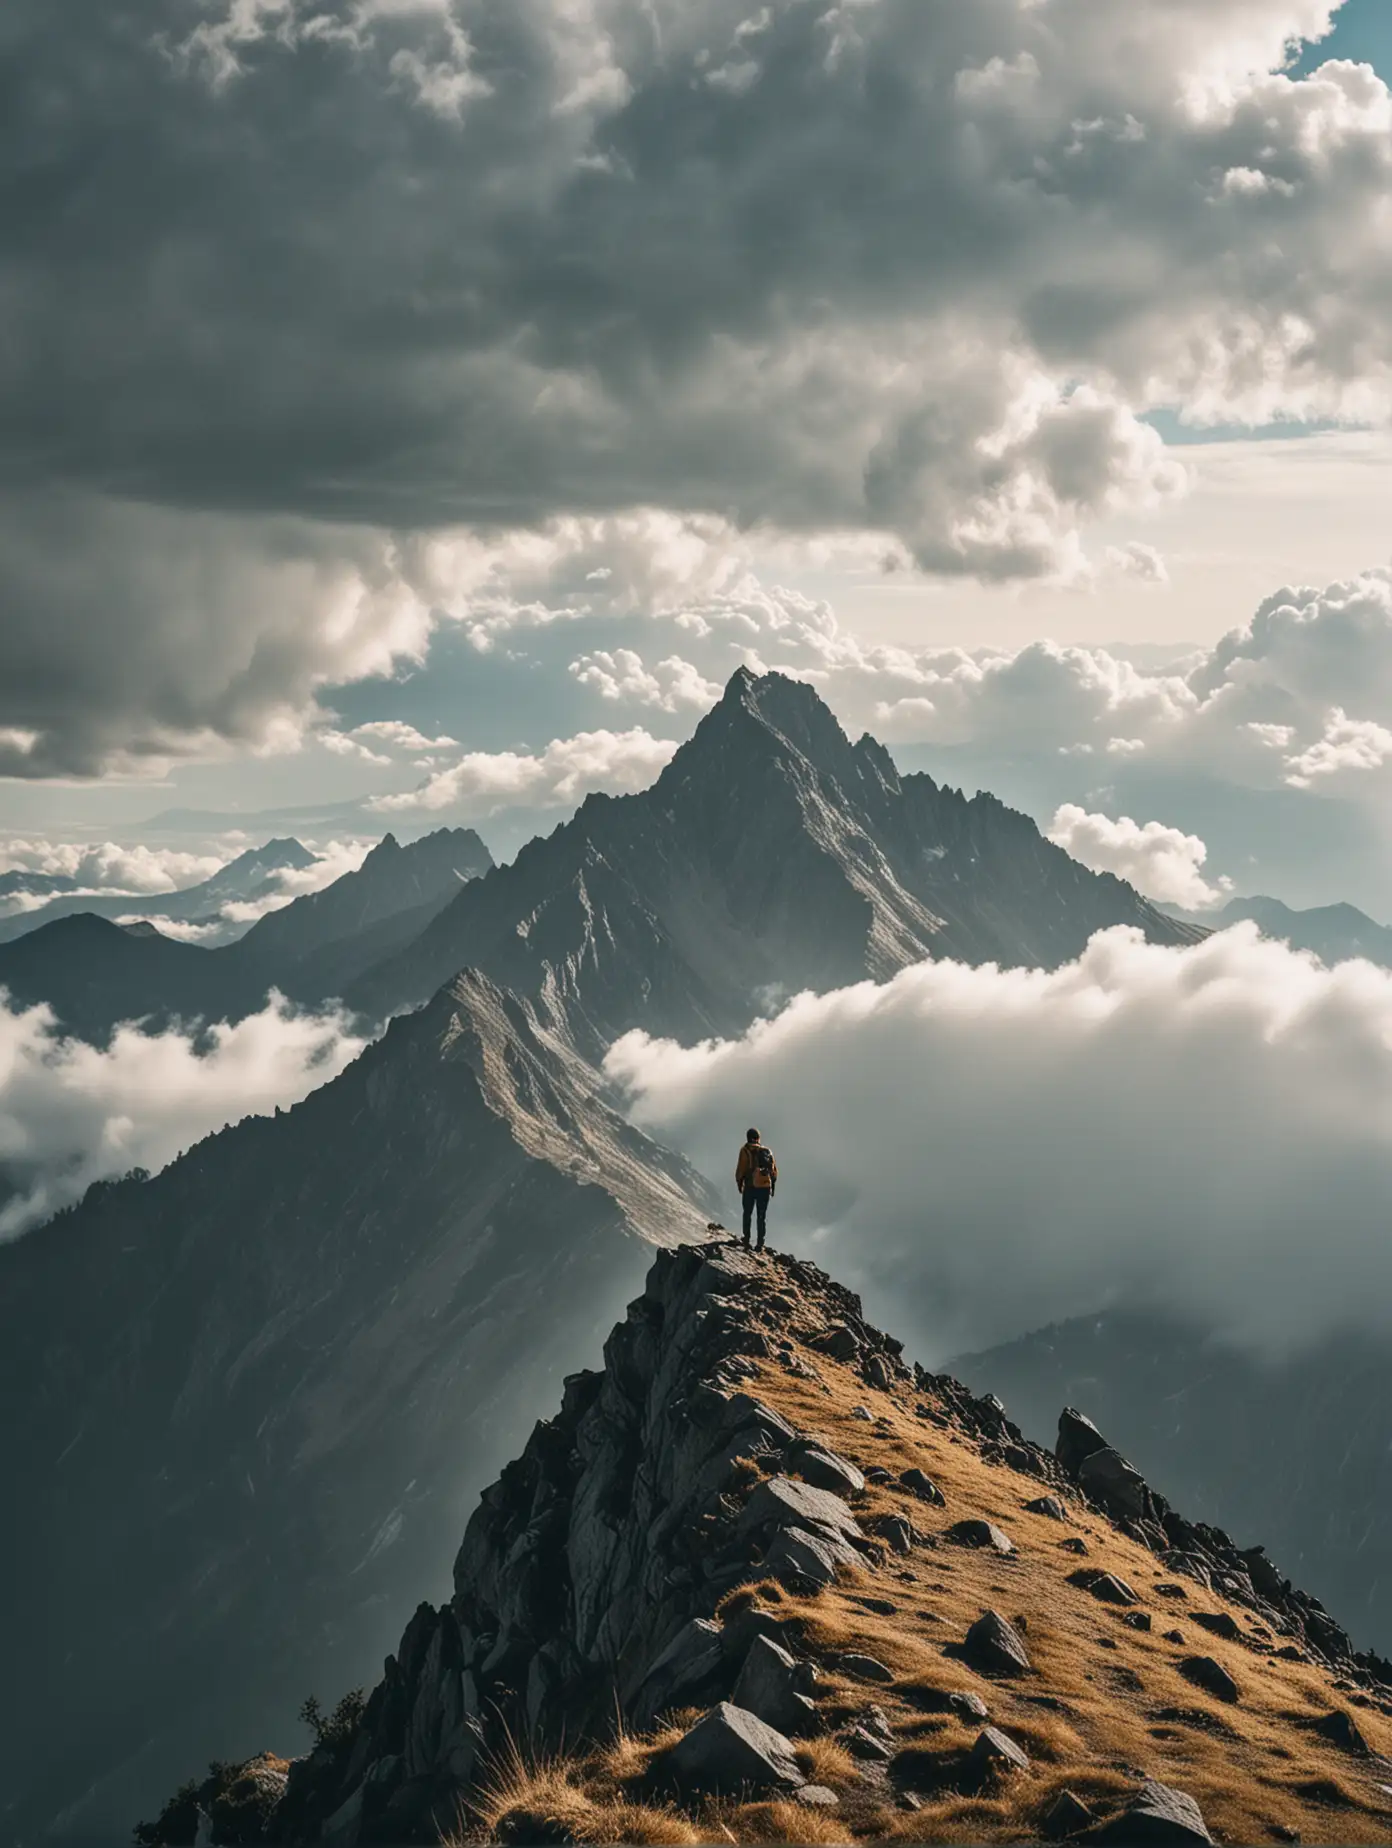 landscape, year 2020, analog photography, nikon, asa 50, man standing on a mountain peak in the foreground, clouds, mountain peaks rising from the clouds 